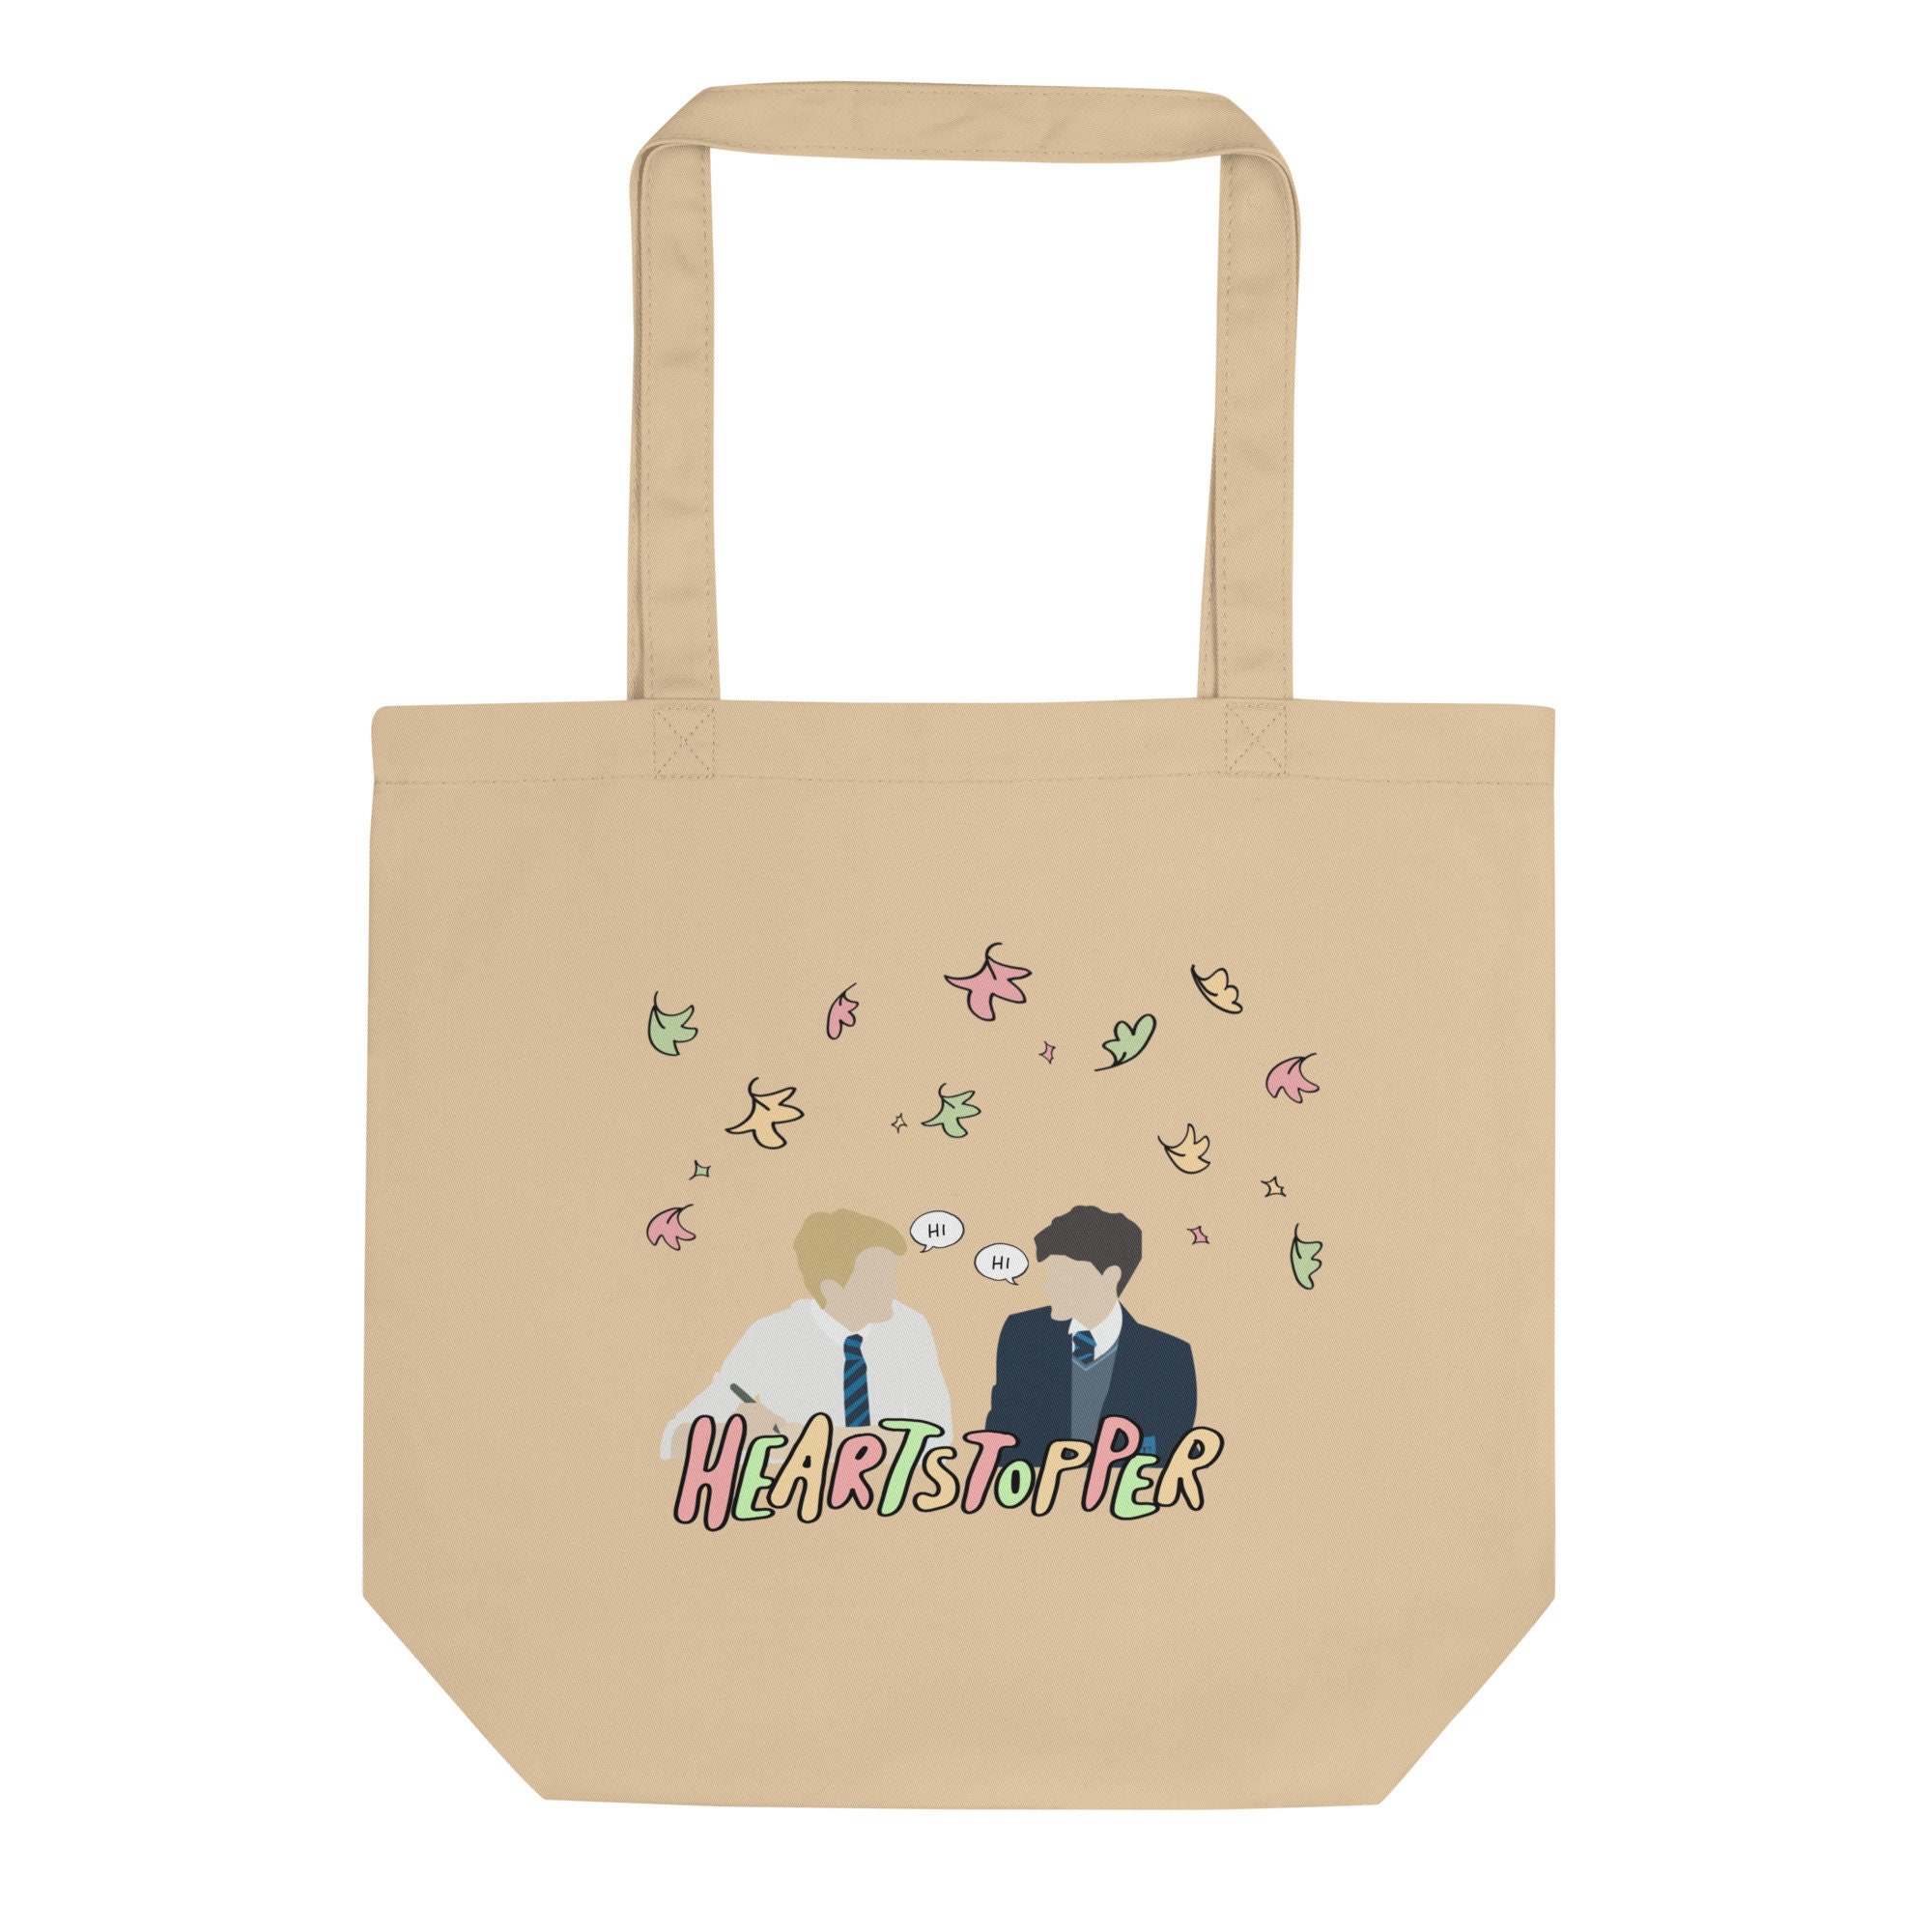 Heartstopper Leaves And Cute Shoes Canvas Tote Bag - Brook Prime